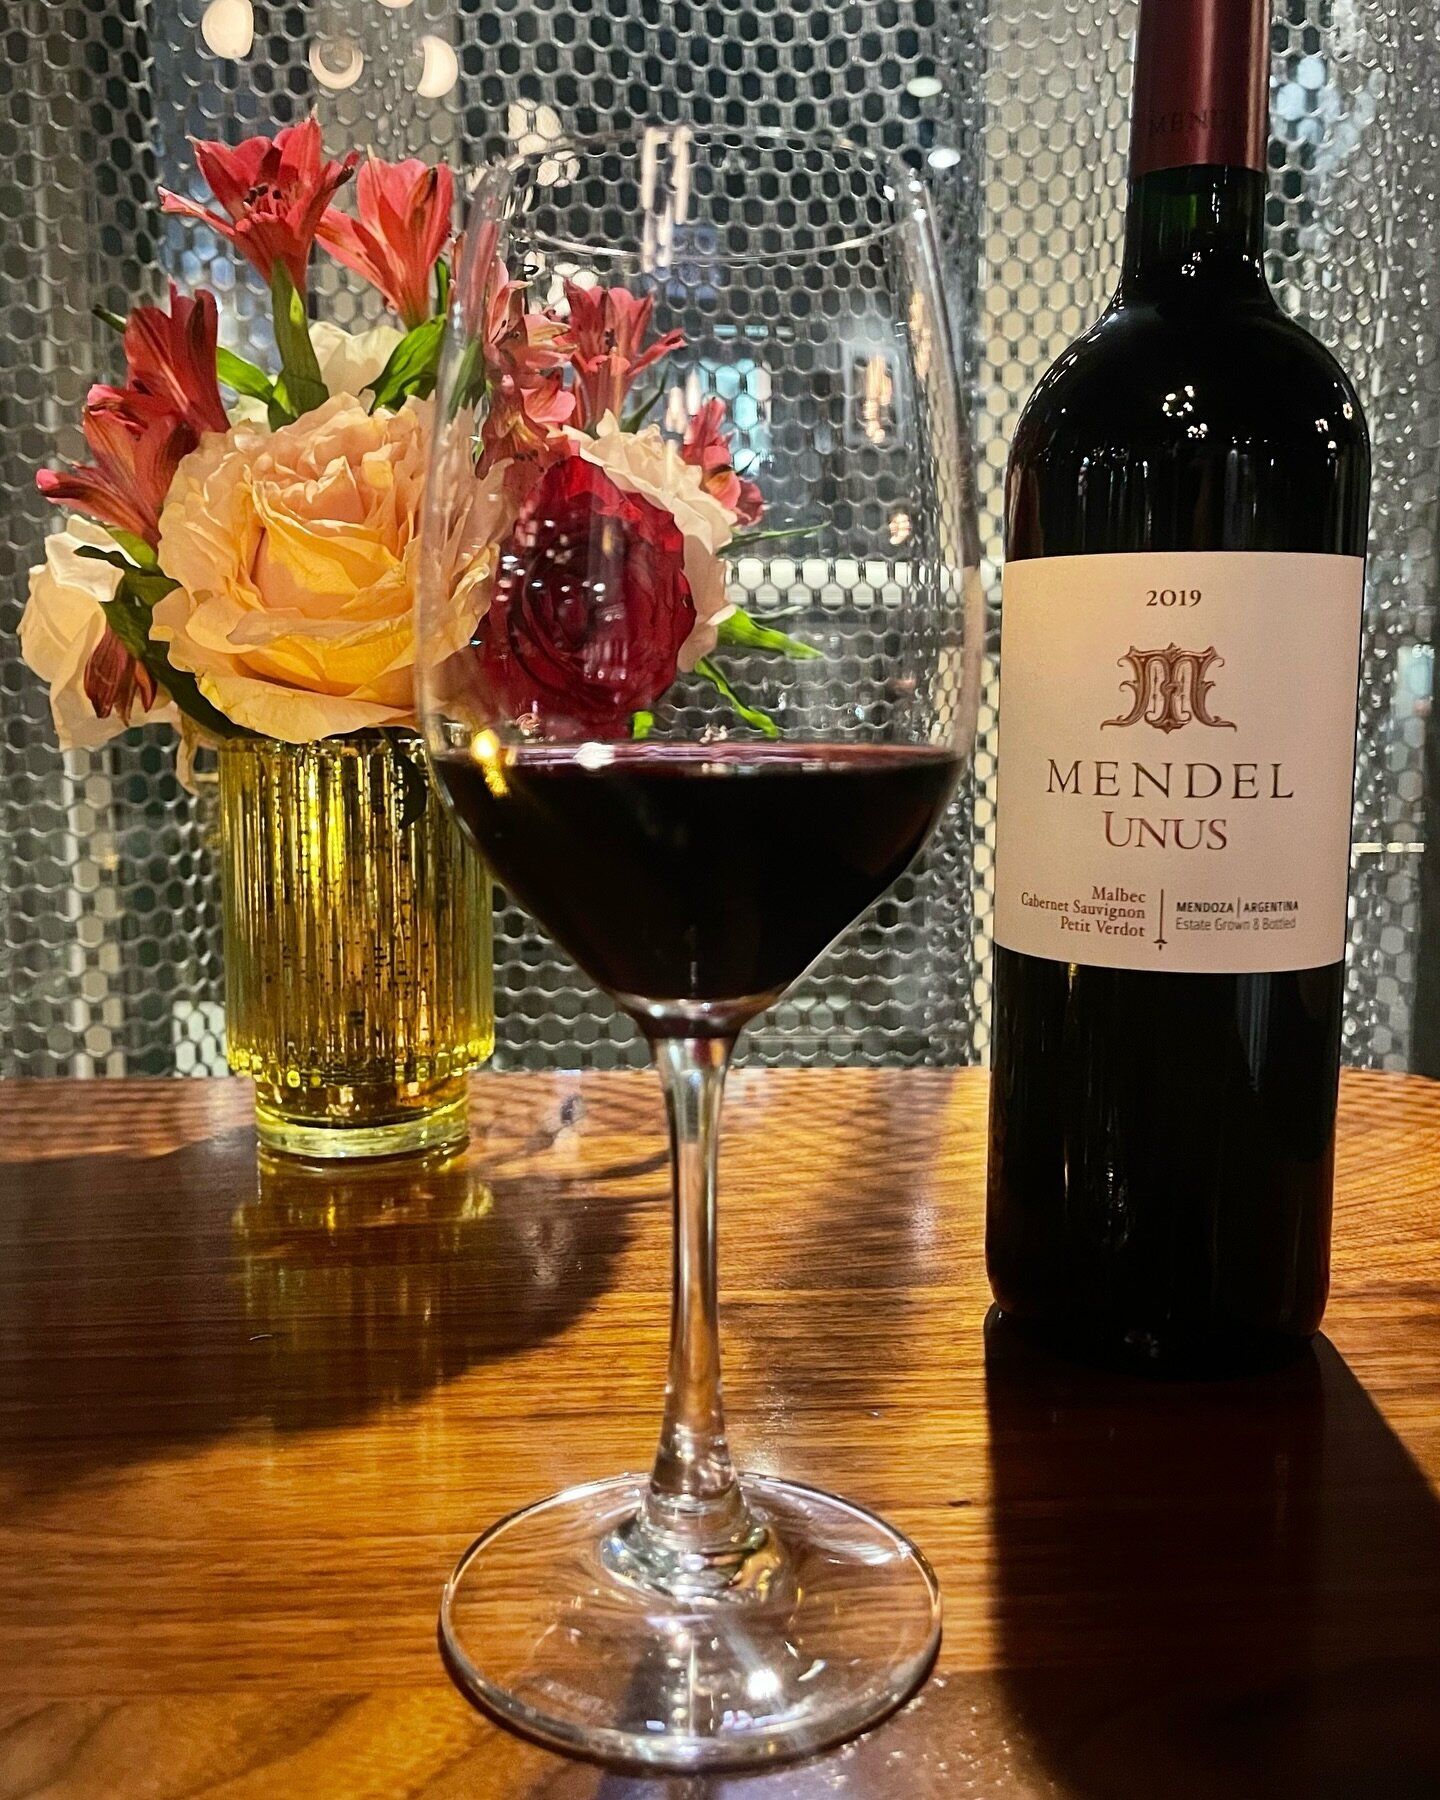 One of Alpana&rsquo;s all-time favorite wines from Argentina! This Mendel &lsquo;Unus&rsquo; from Mendoza is a blend of Malbec, Cabernet Sauvignon, and Petit Verdot. In the glass you&rsquo;ll find aromas of dark cherries, plums and roasted cocoa. 🍒 